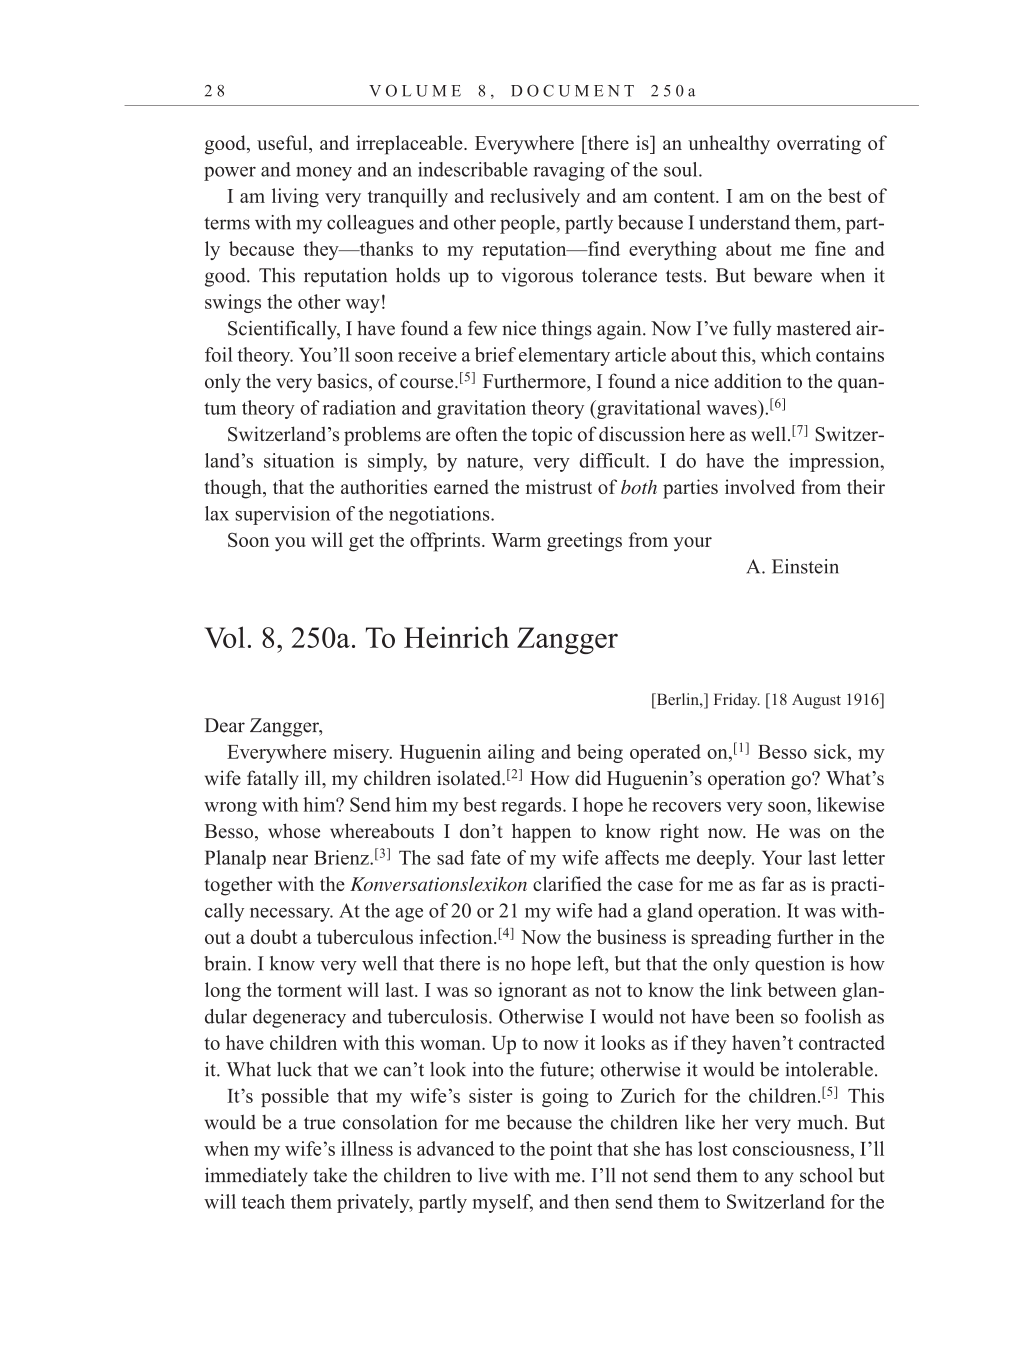 Volume 10: The Berlin Years: Correspondence, May-December 1920, and Supplementary Correspondence, 1909-1920 (English translation supplement) page 28